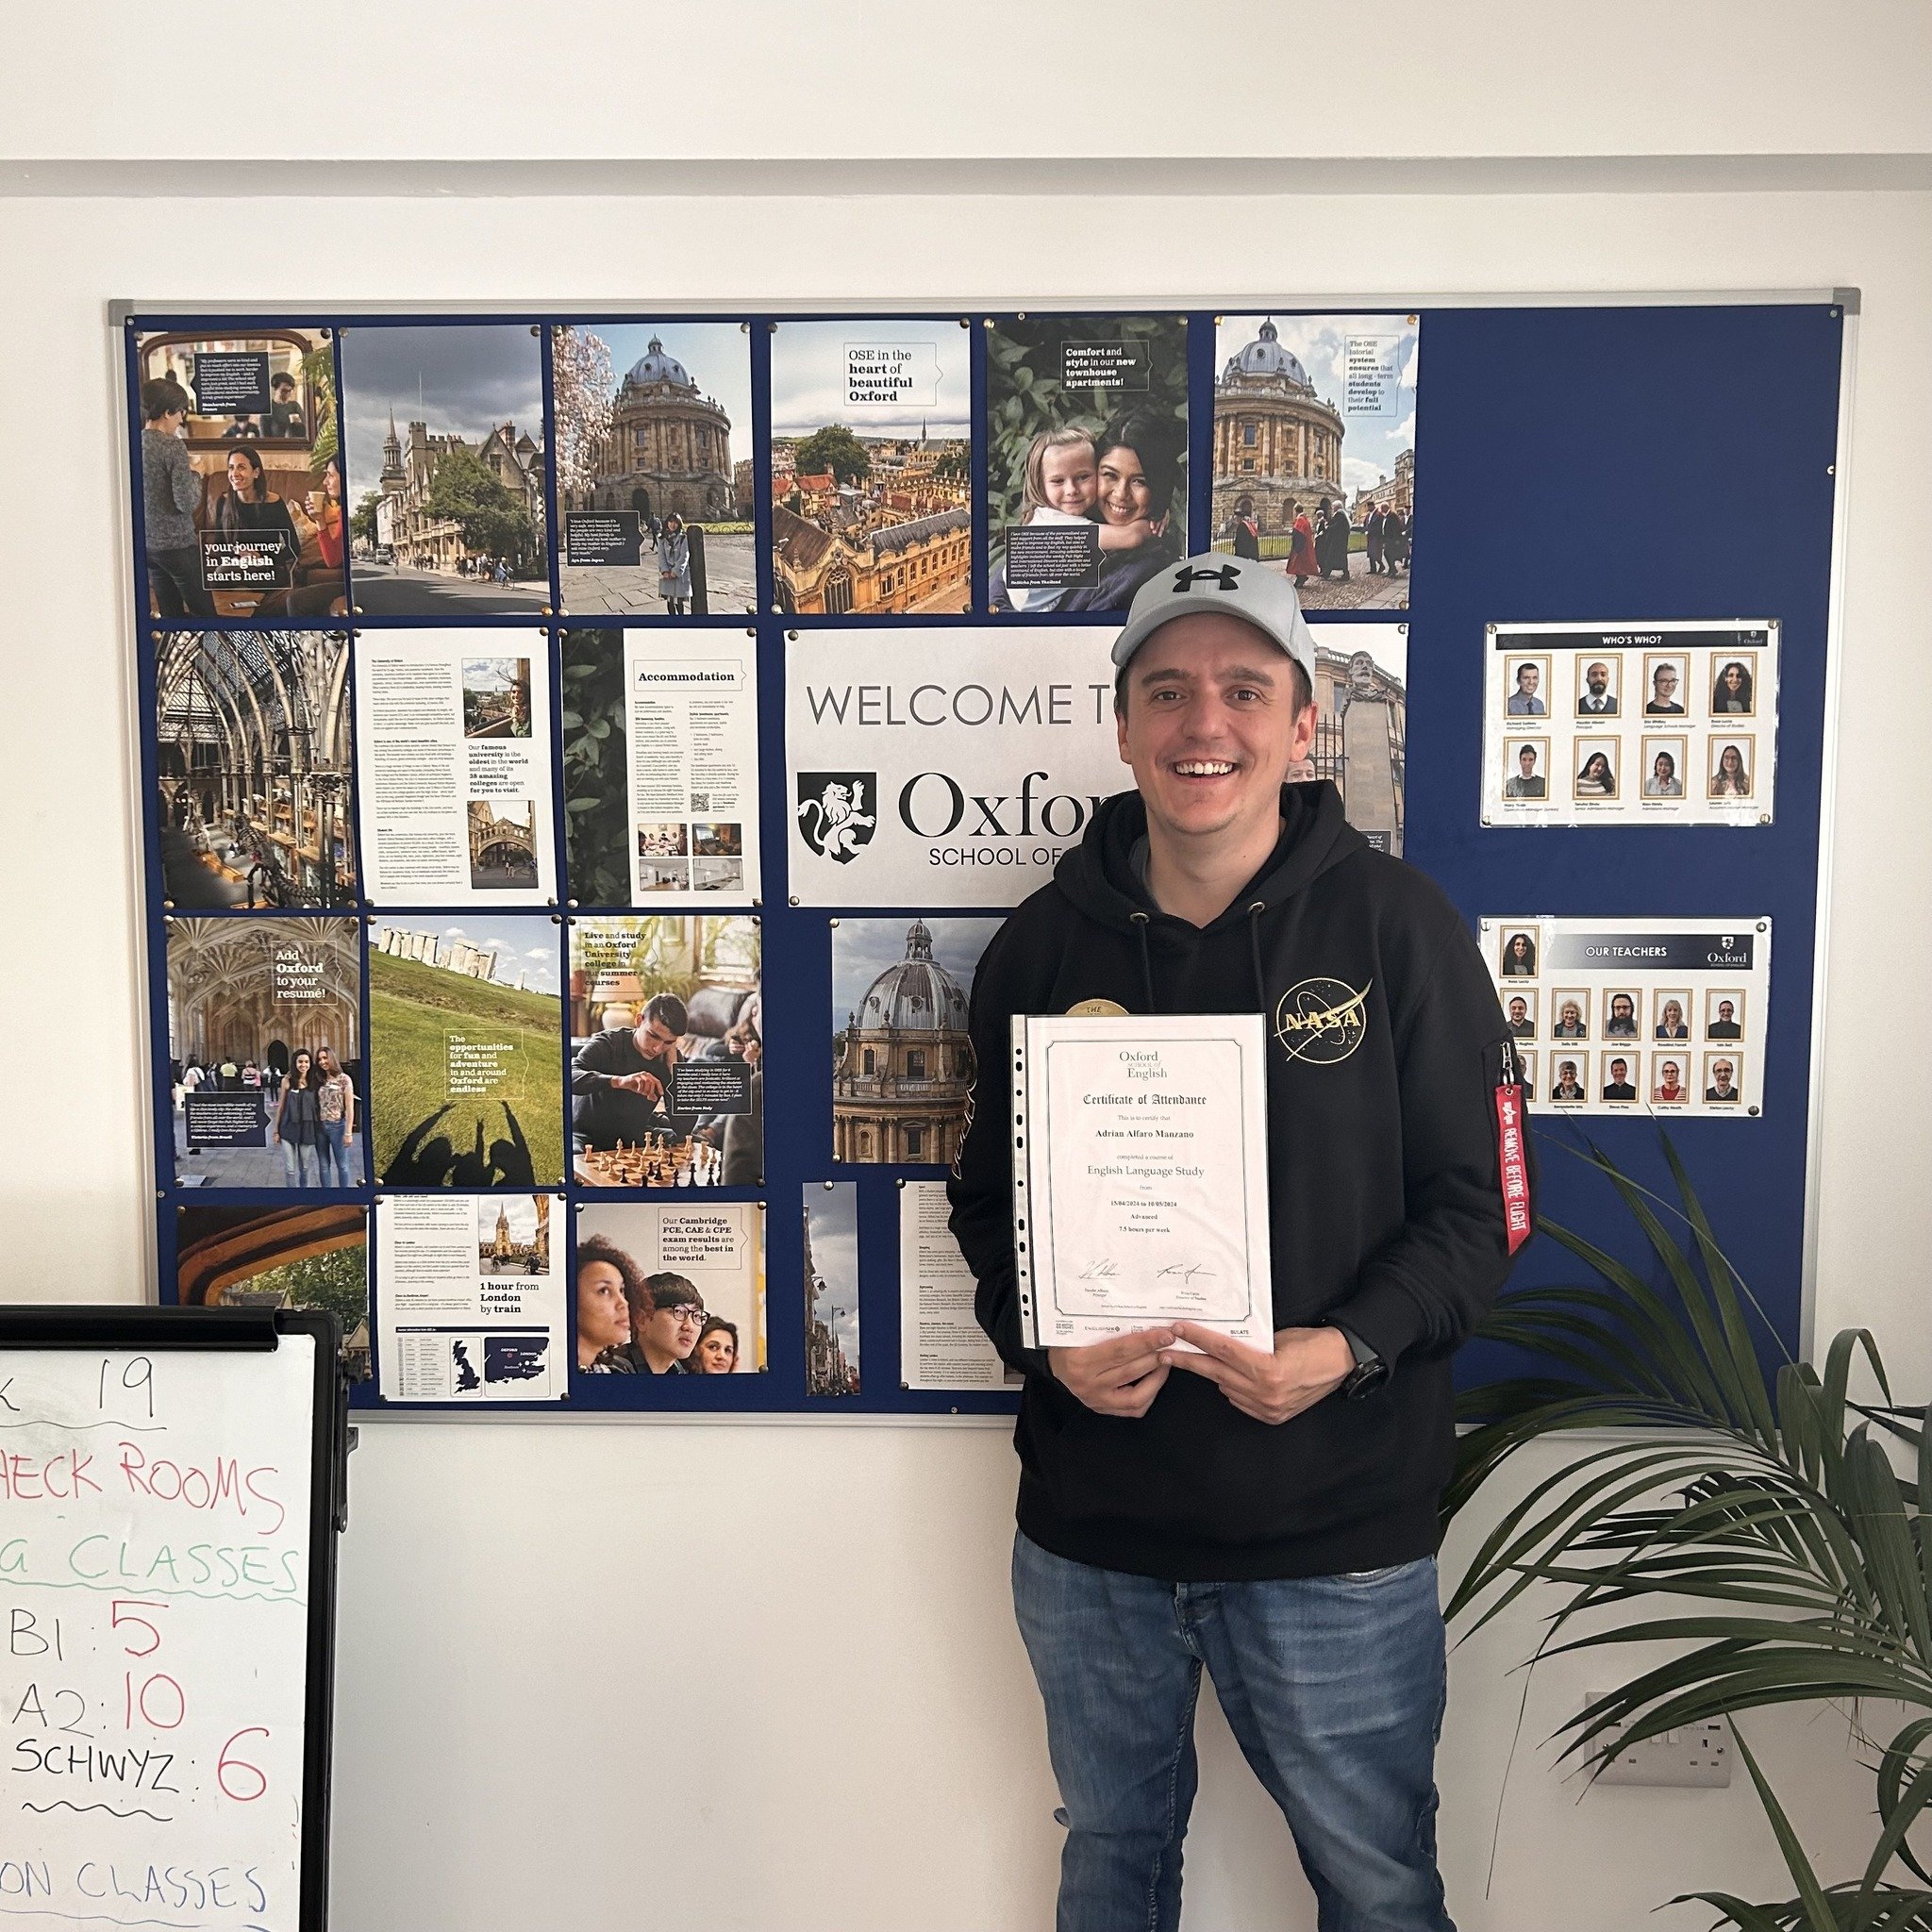 Best of luck to our student from Barcelona, Adrian!✨

We wish you all the best and good luck achieving your dreams of becoming a pilot!☁️✈️☁️

 #englishoxford #studyabroadyenglish #englishlanguage #cityofoxford #city #learnenglishinoxford #studyengli